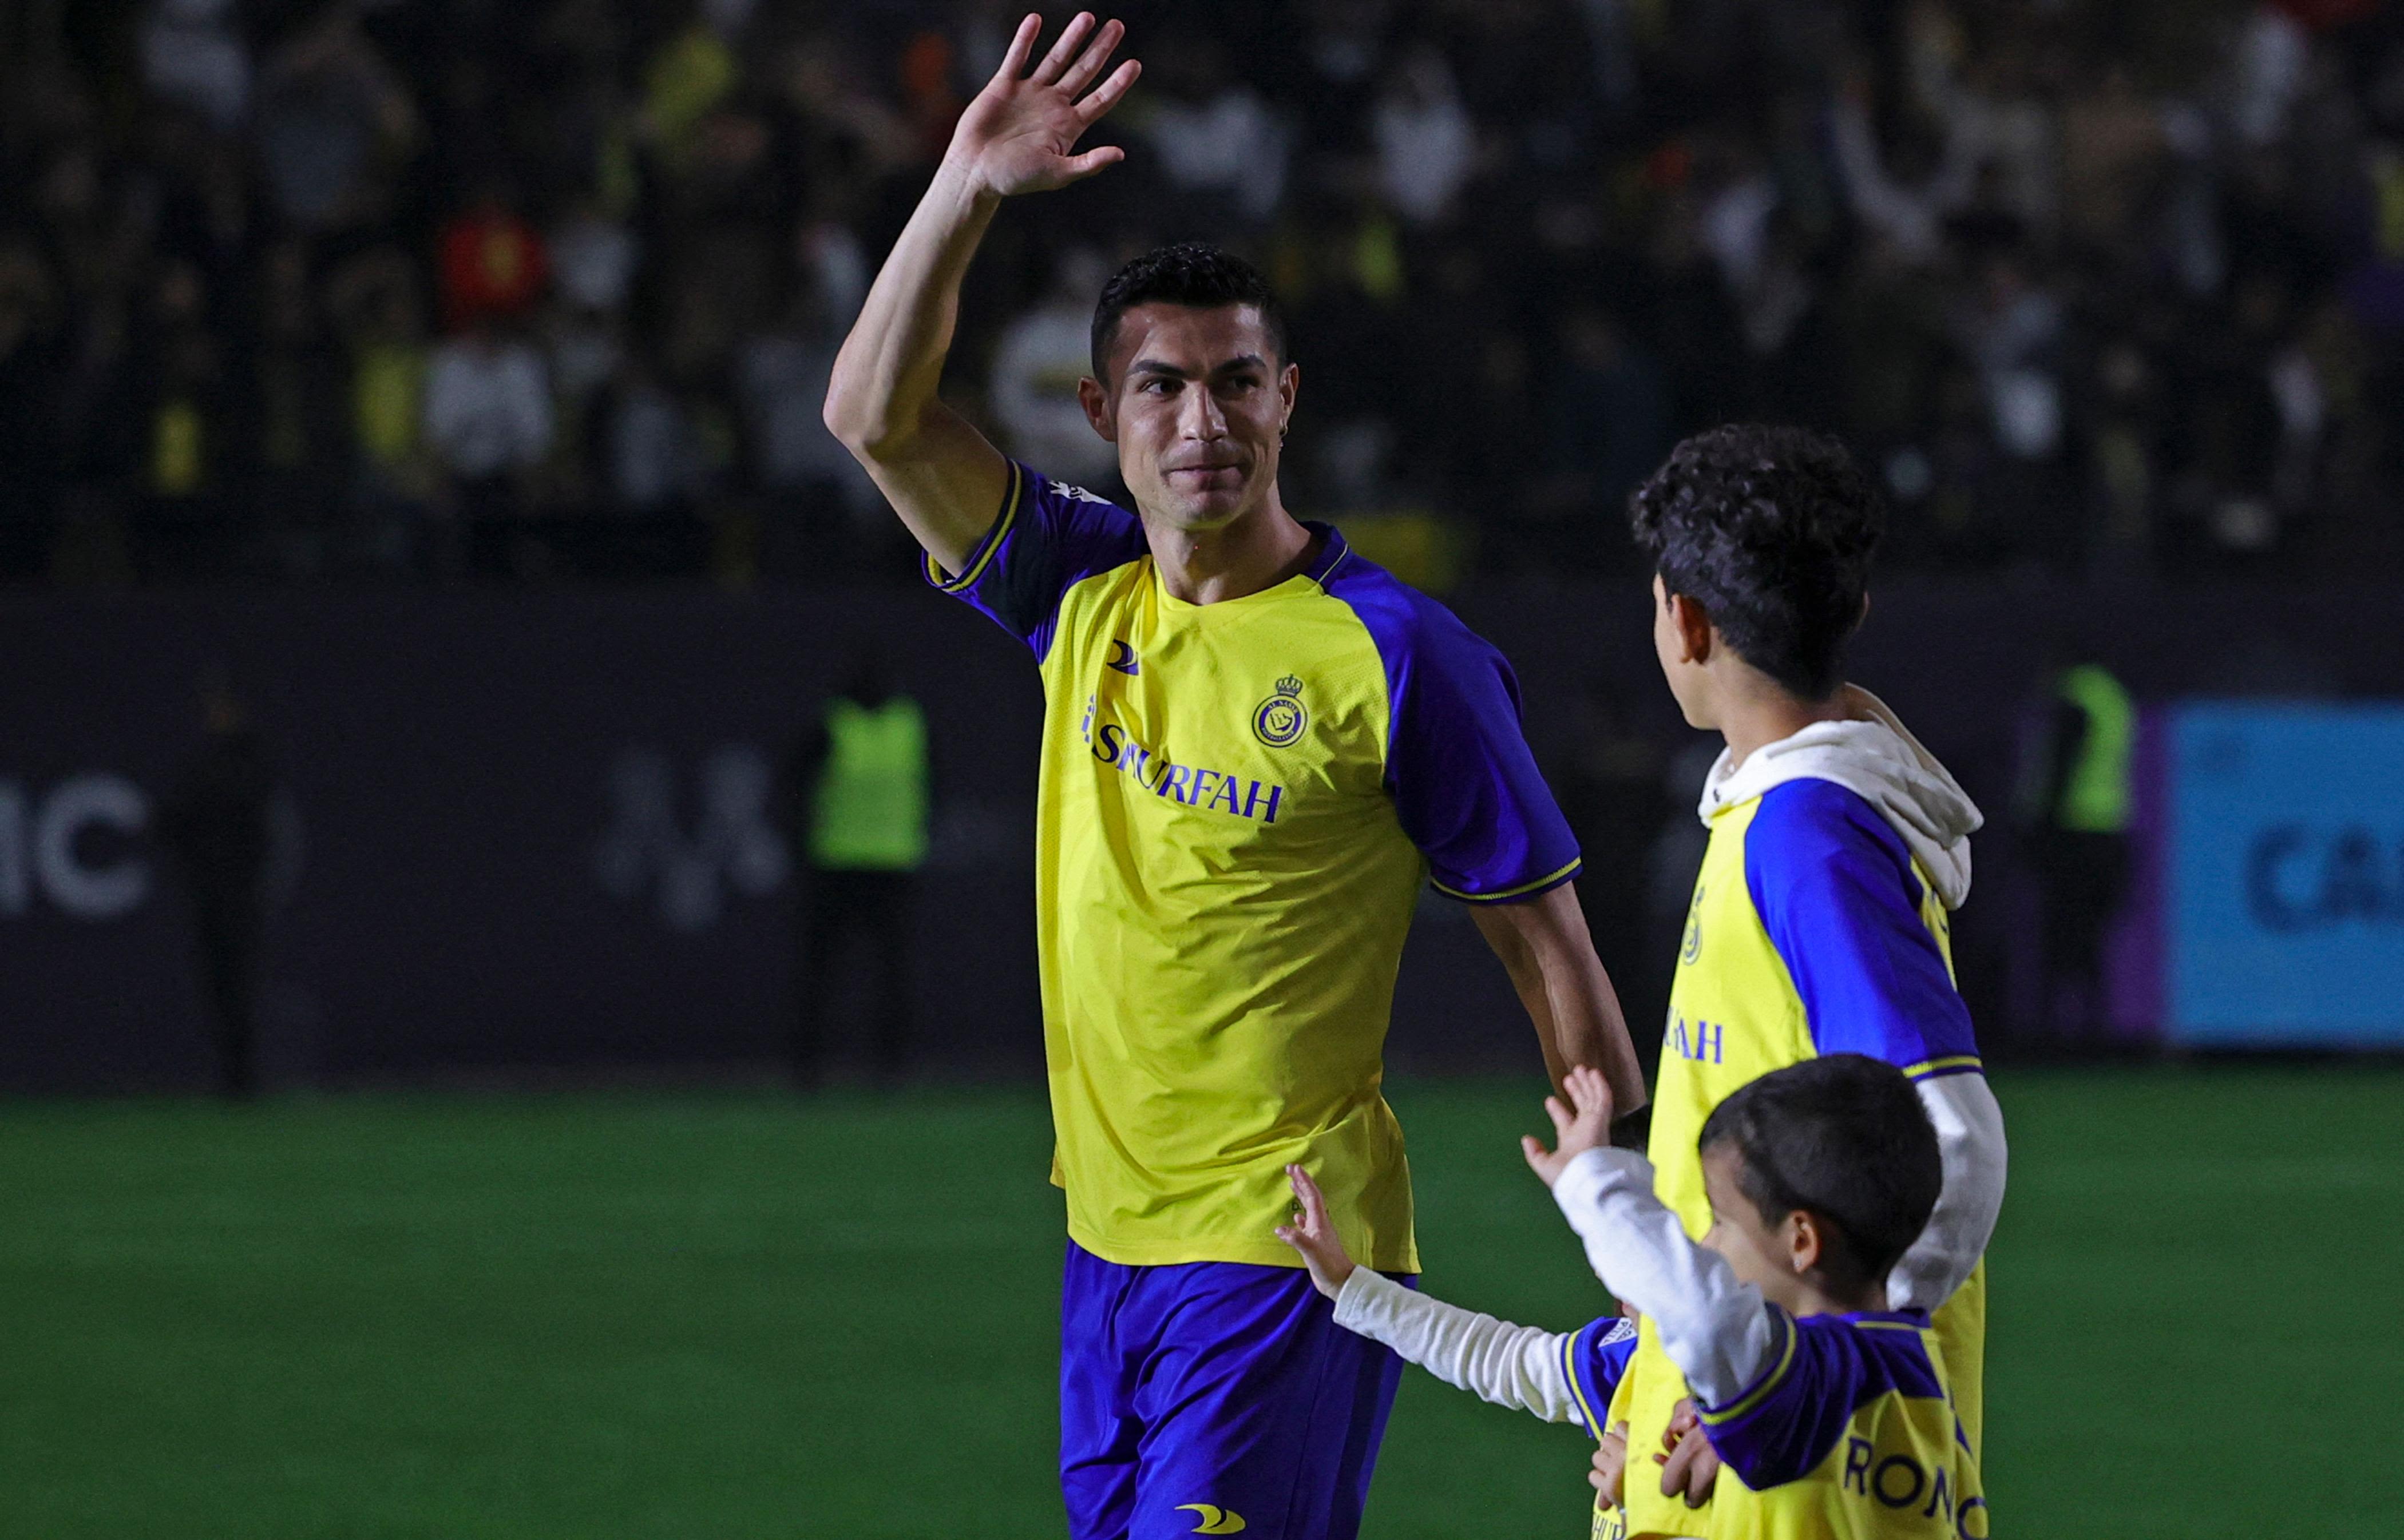 On Tuesday, Ronaldo was presented in front of Al-Nassr fans